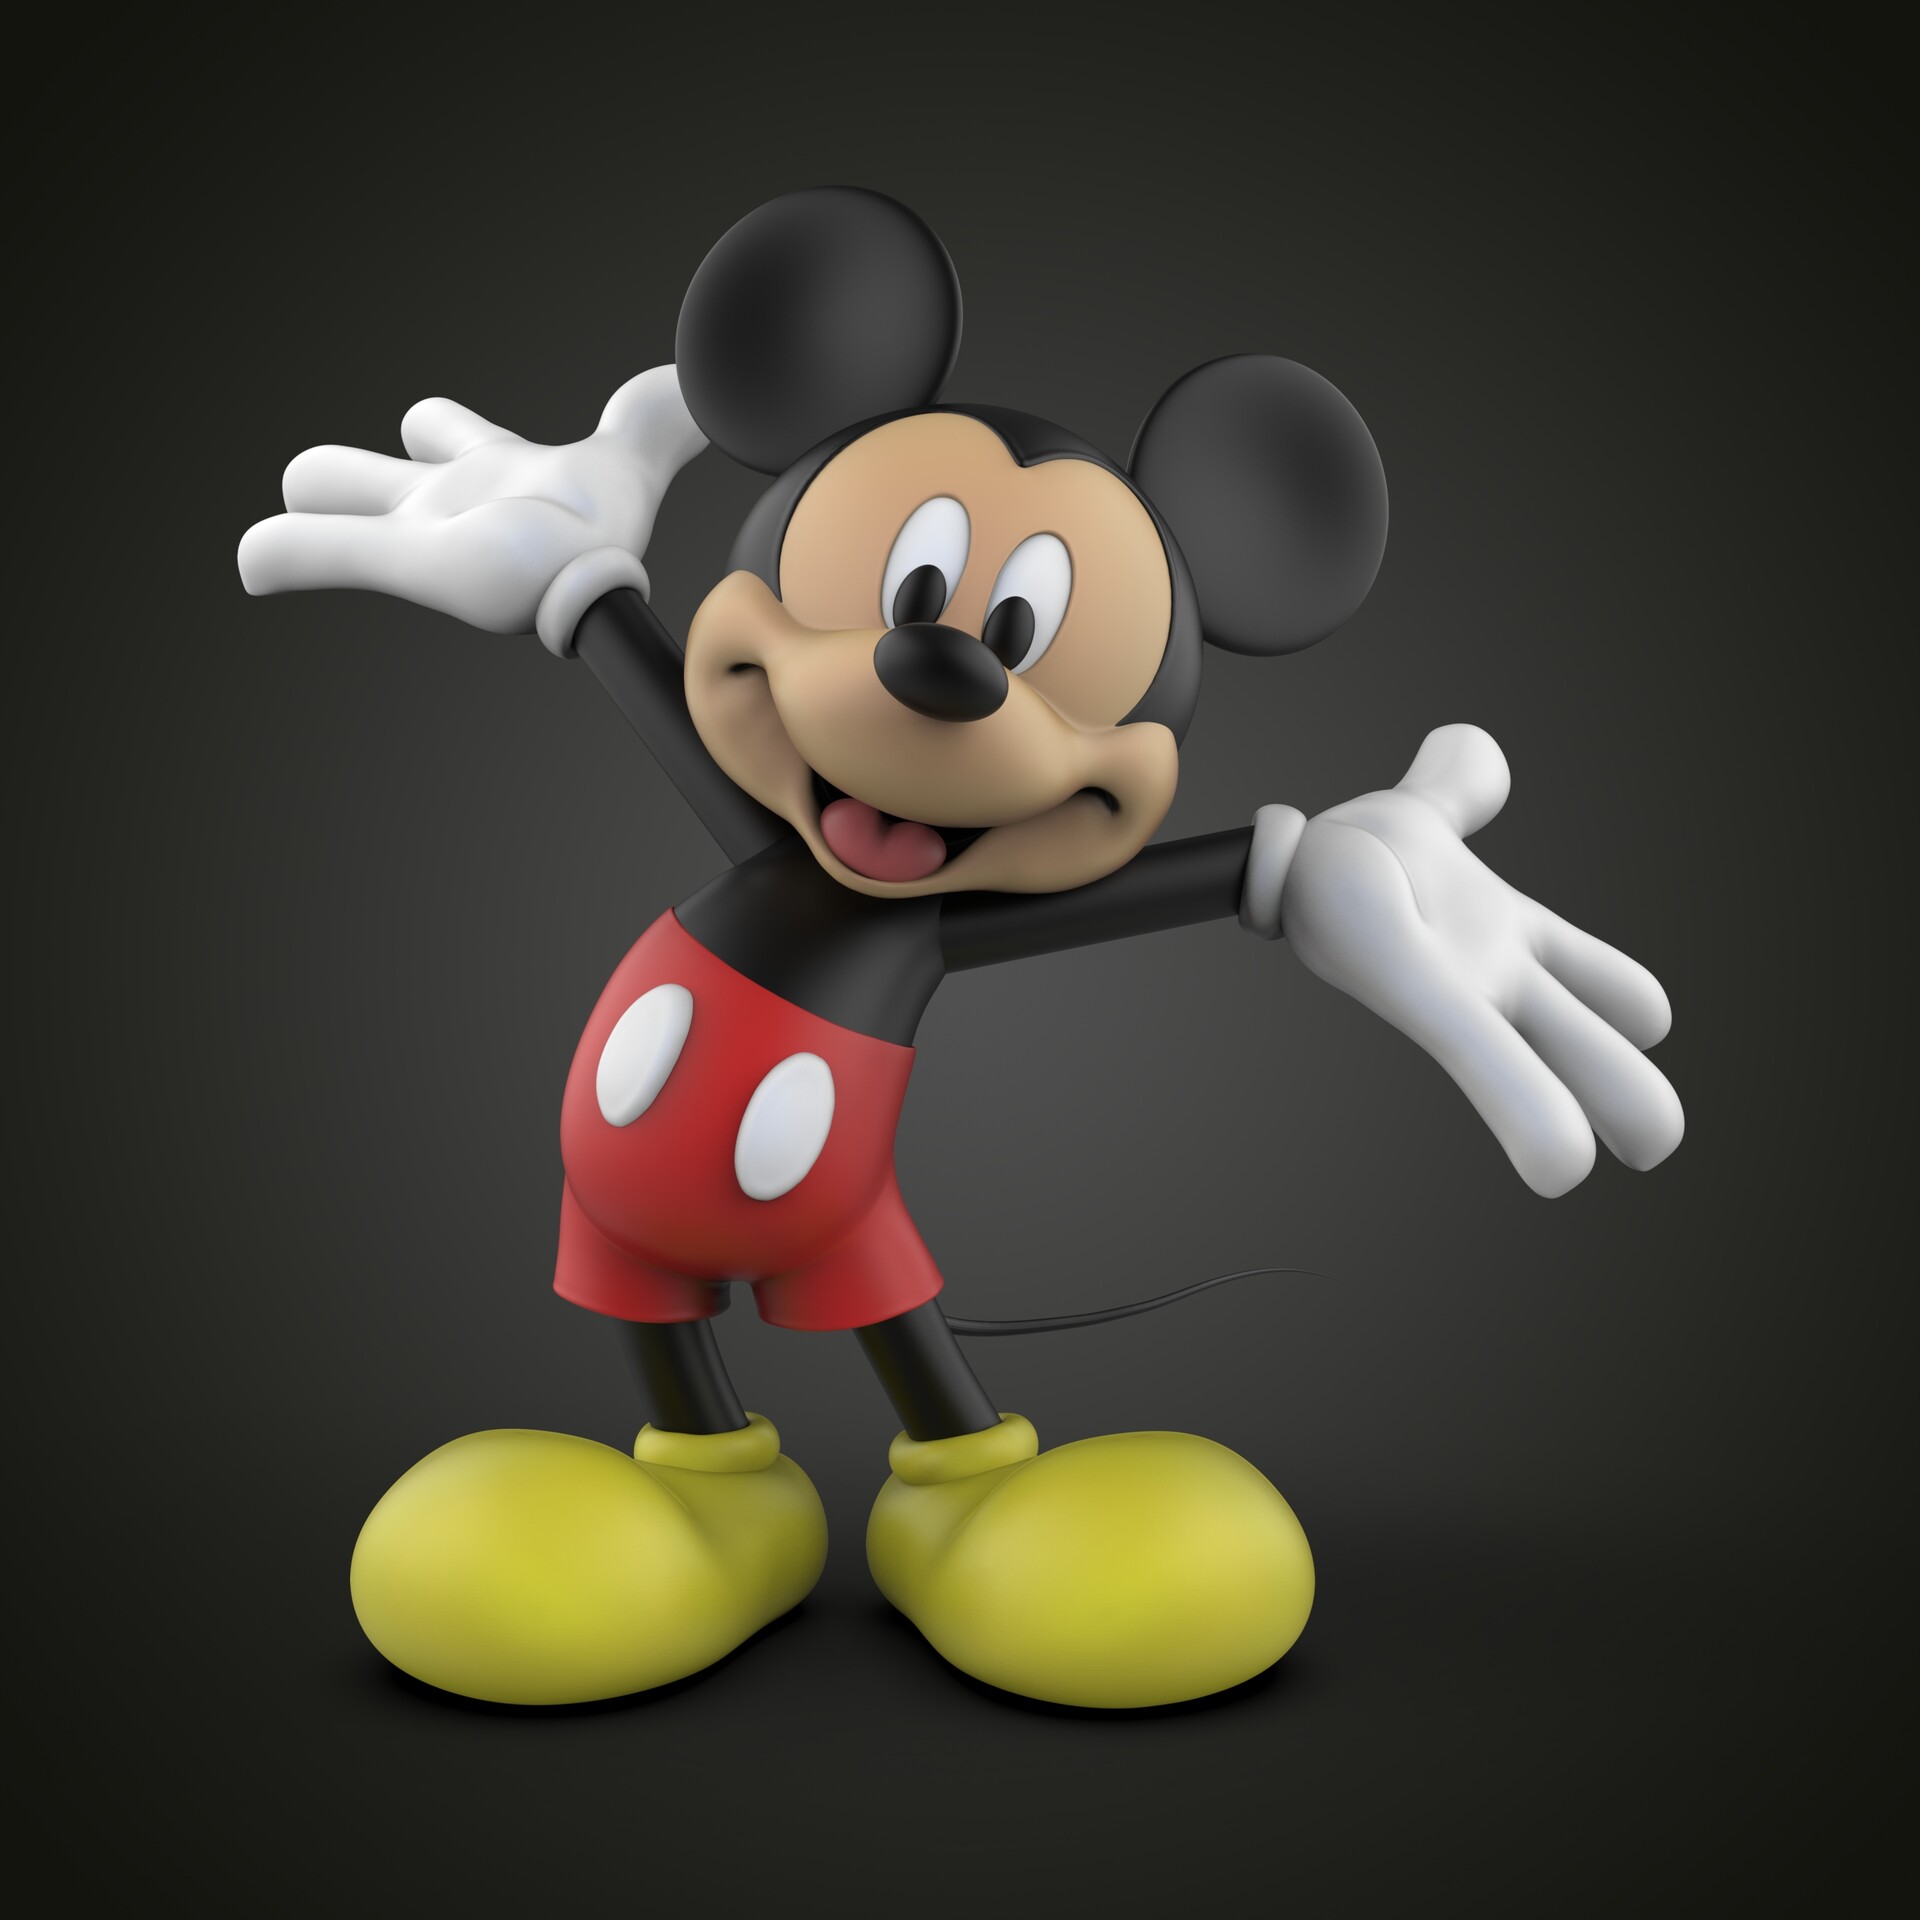 1,636 Mickey Mouse Cartoon Character Images, Stock Photos, 3D